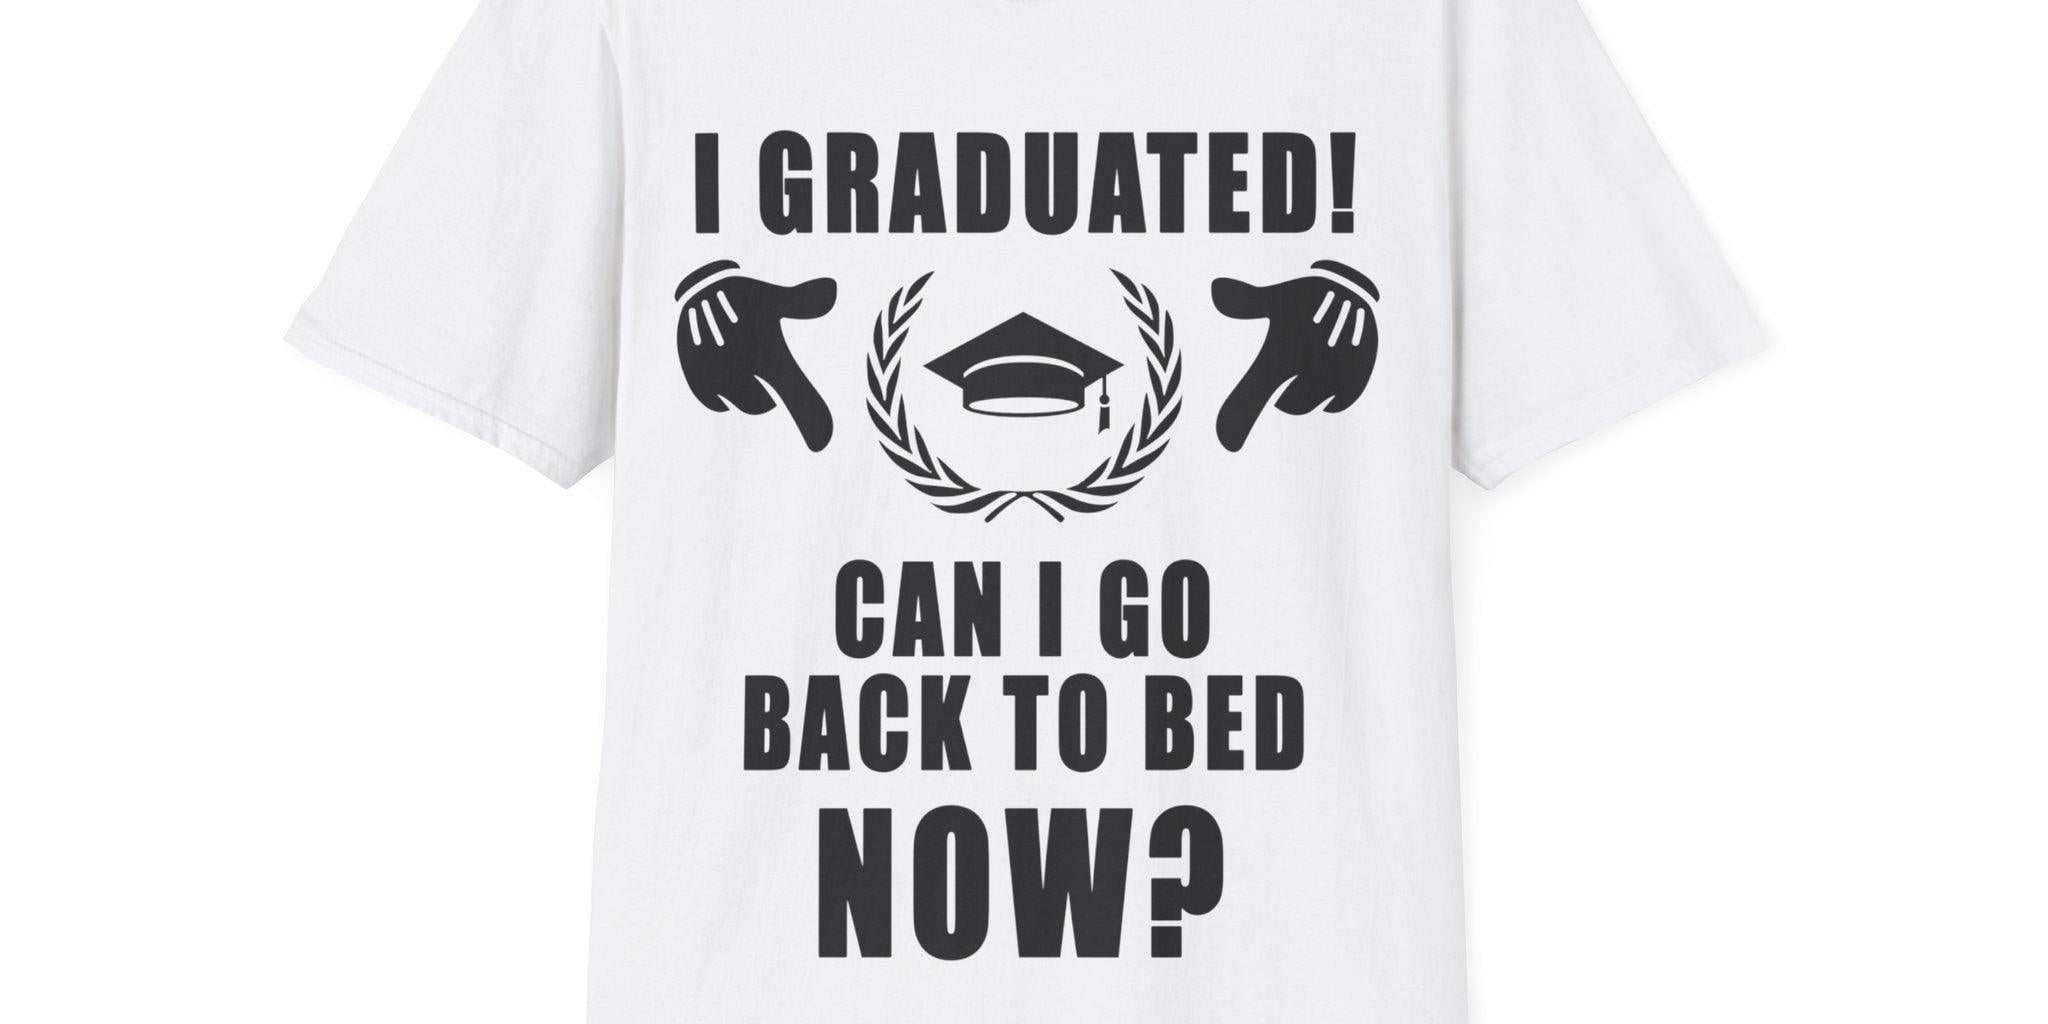 I Graduated! Can I Go Back To Bed Now? T-Shirts,2022 Graduates, Graduation 2022, Senior Class Of 2022,Graduation Tee School Pride School Cotton, Crew neck, DTG, Men's Clothing, Regular fit, T-shirts, Women's Clothing - plusminusco.com